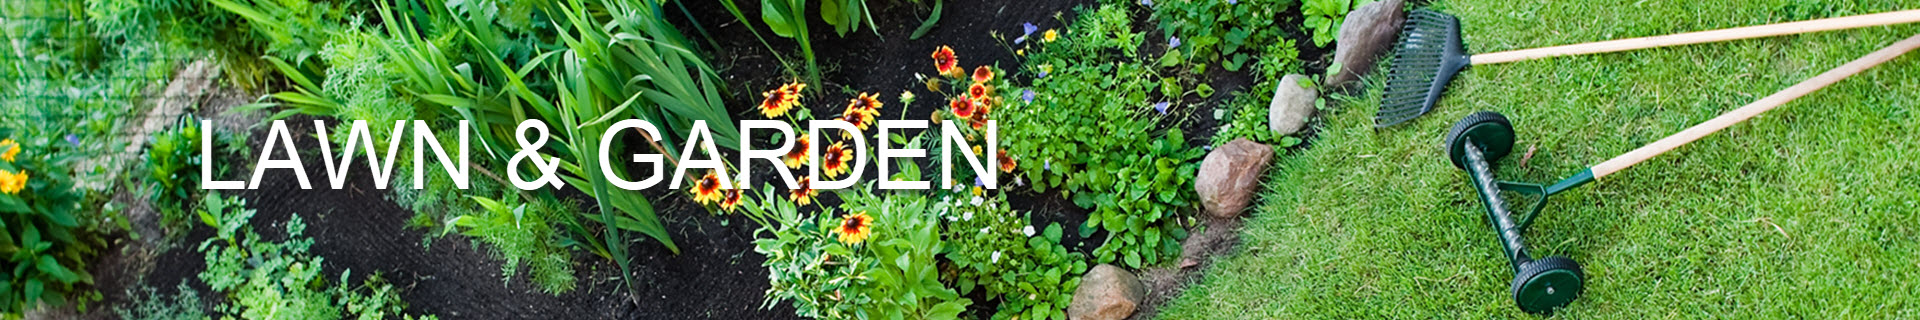 Lawn and Garden Banner Image